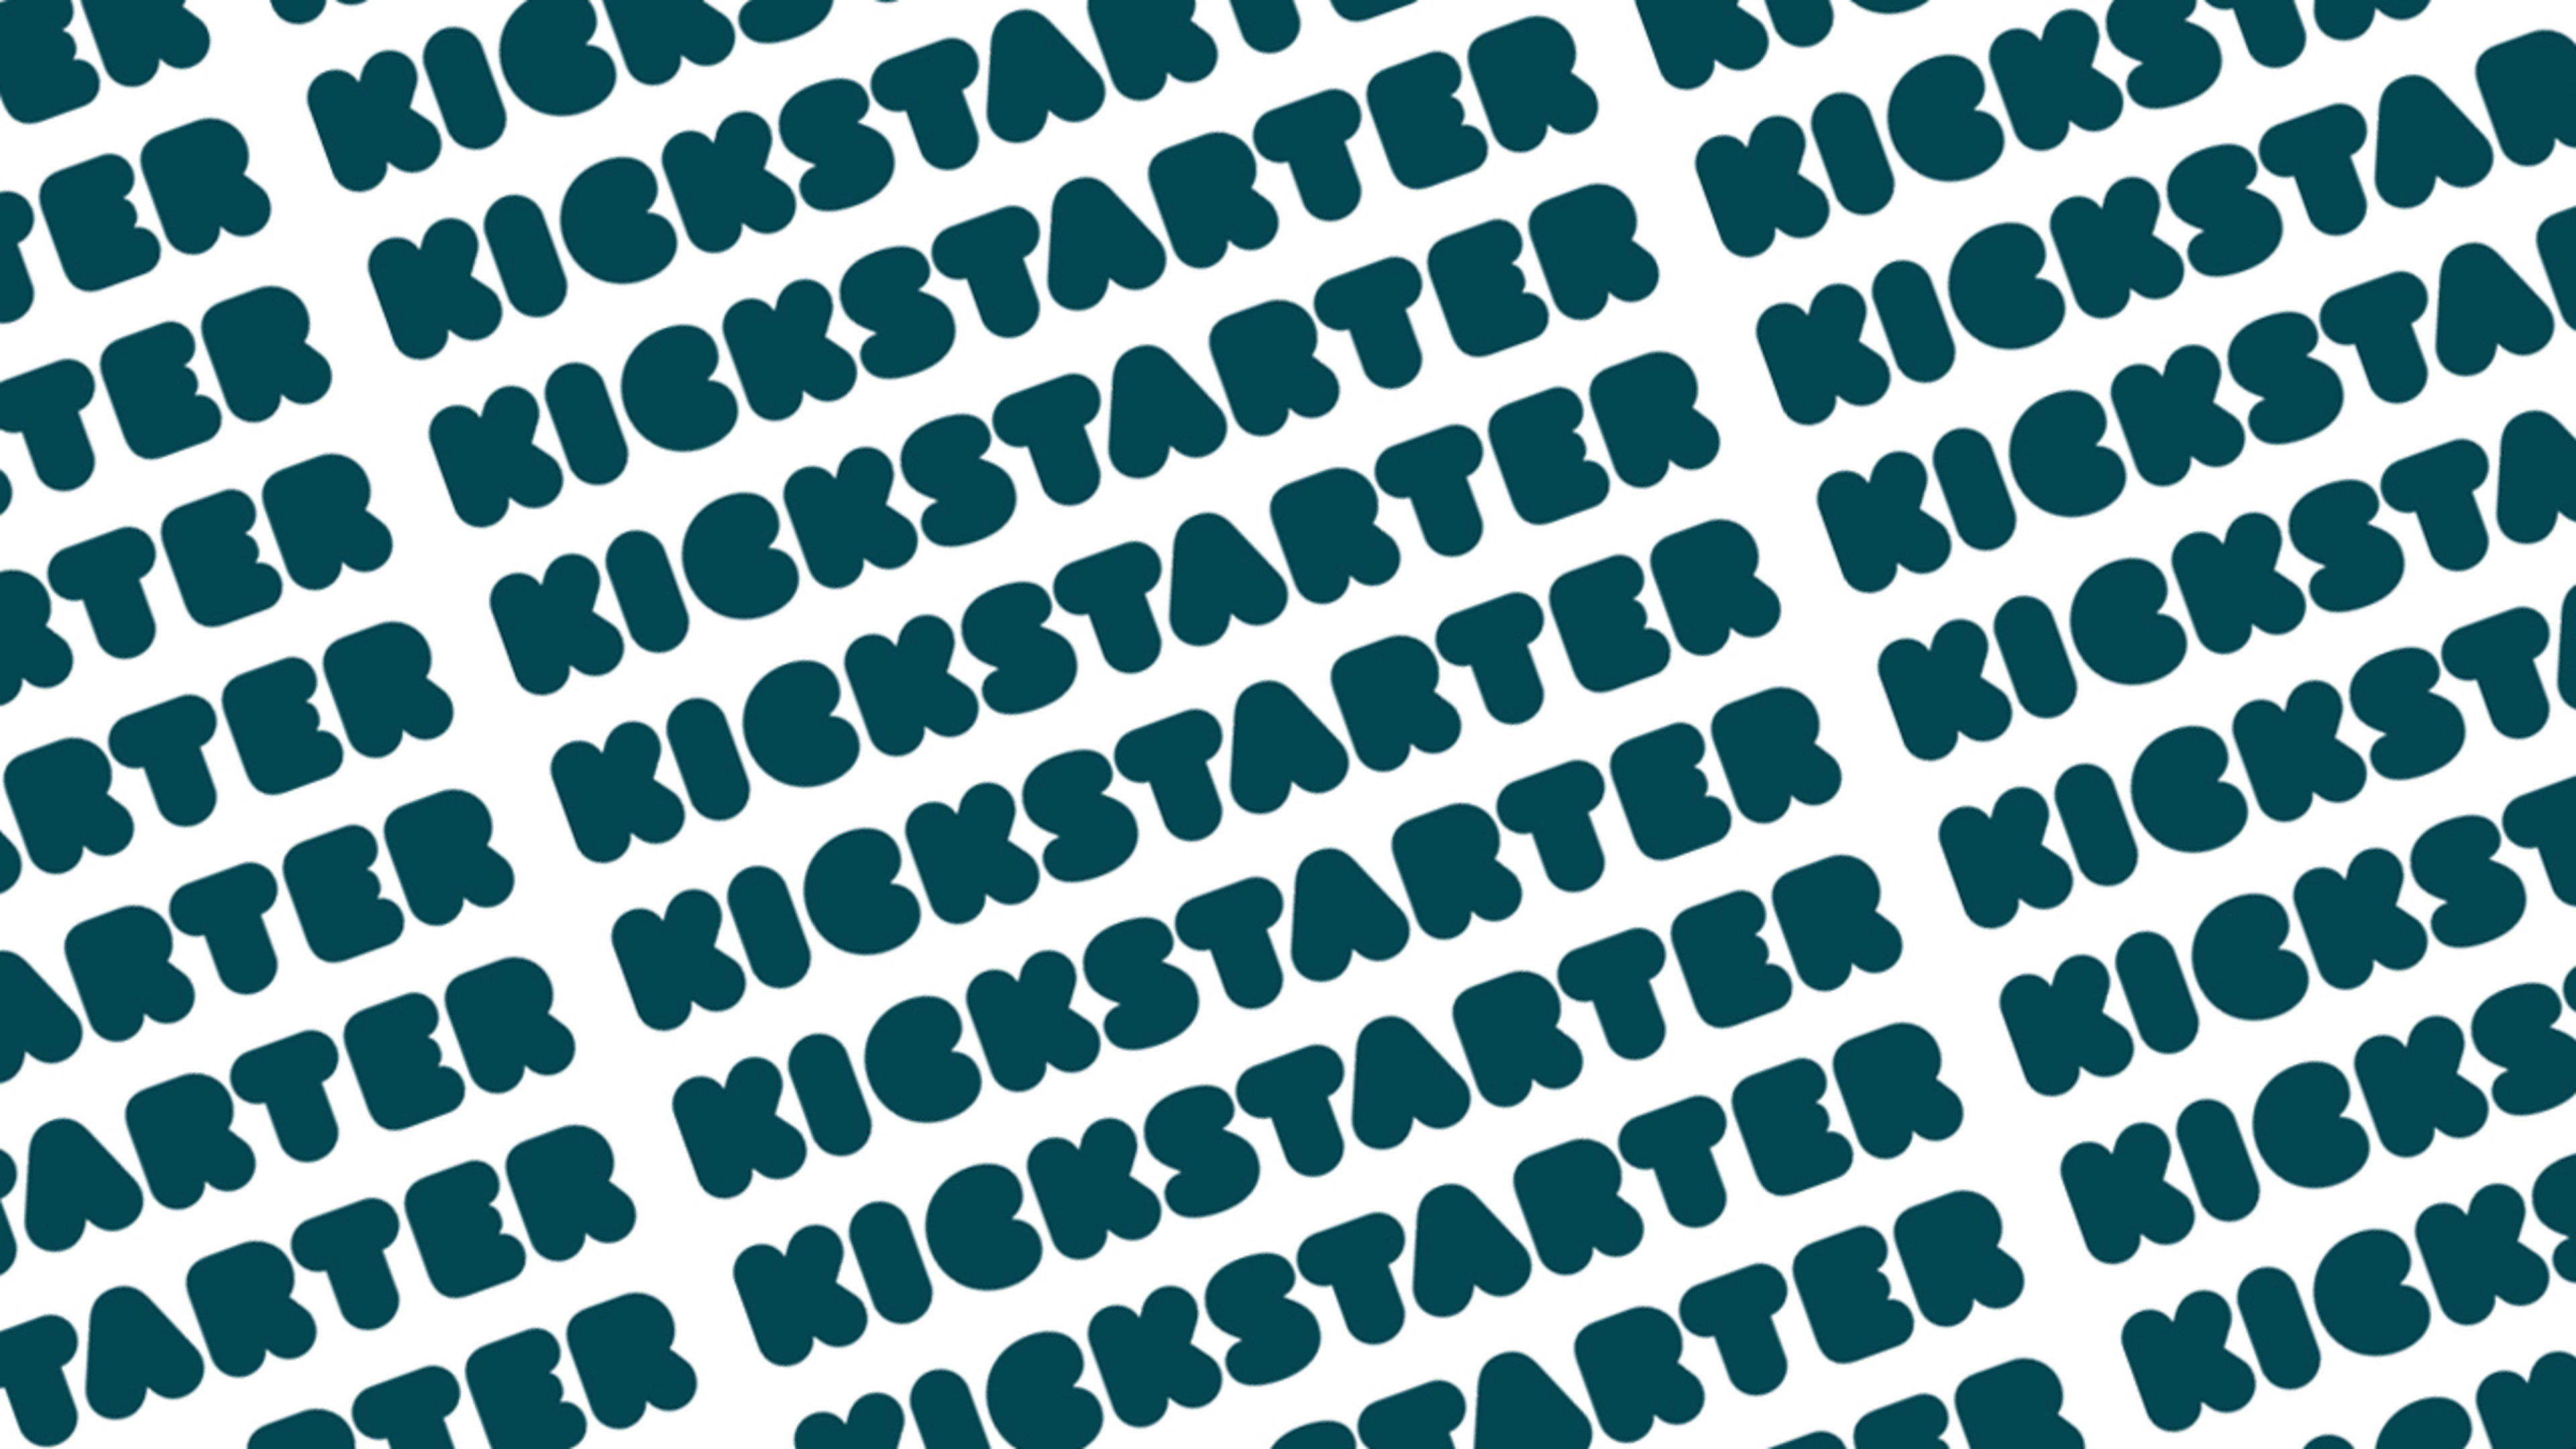 A Kickstarter exec is accusing Indiegogo of fudging its numbers